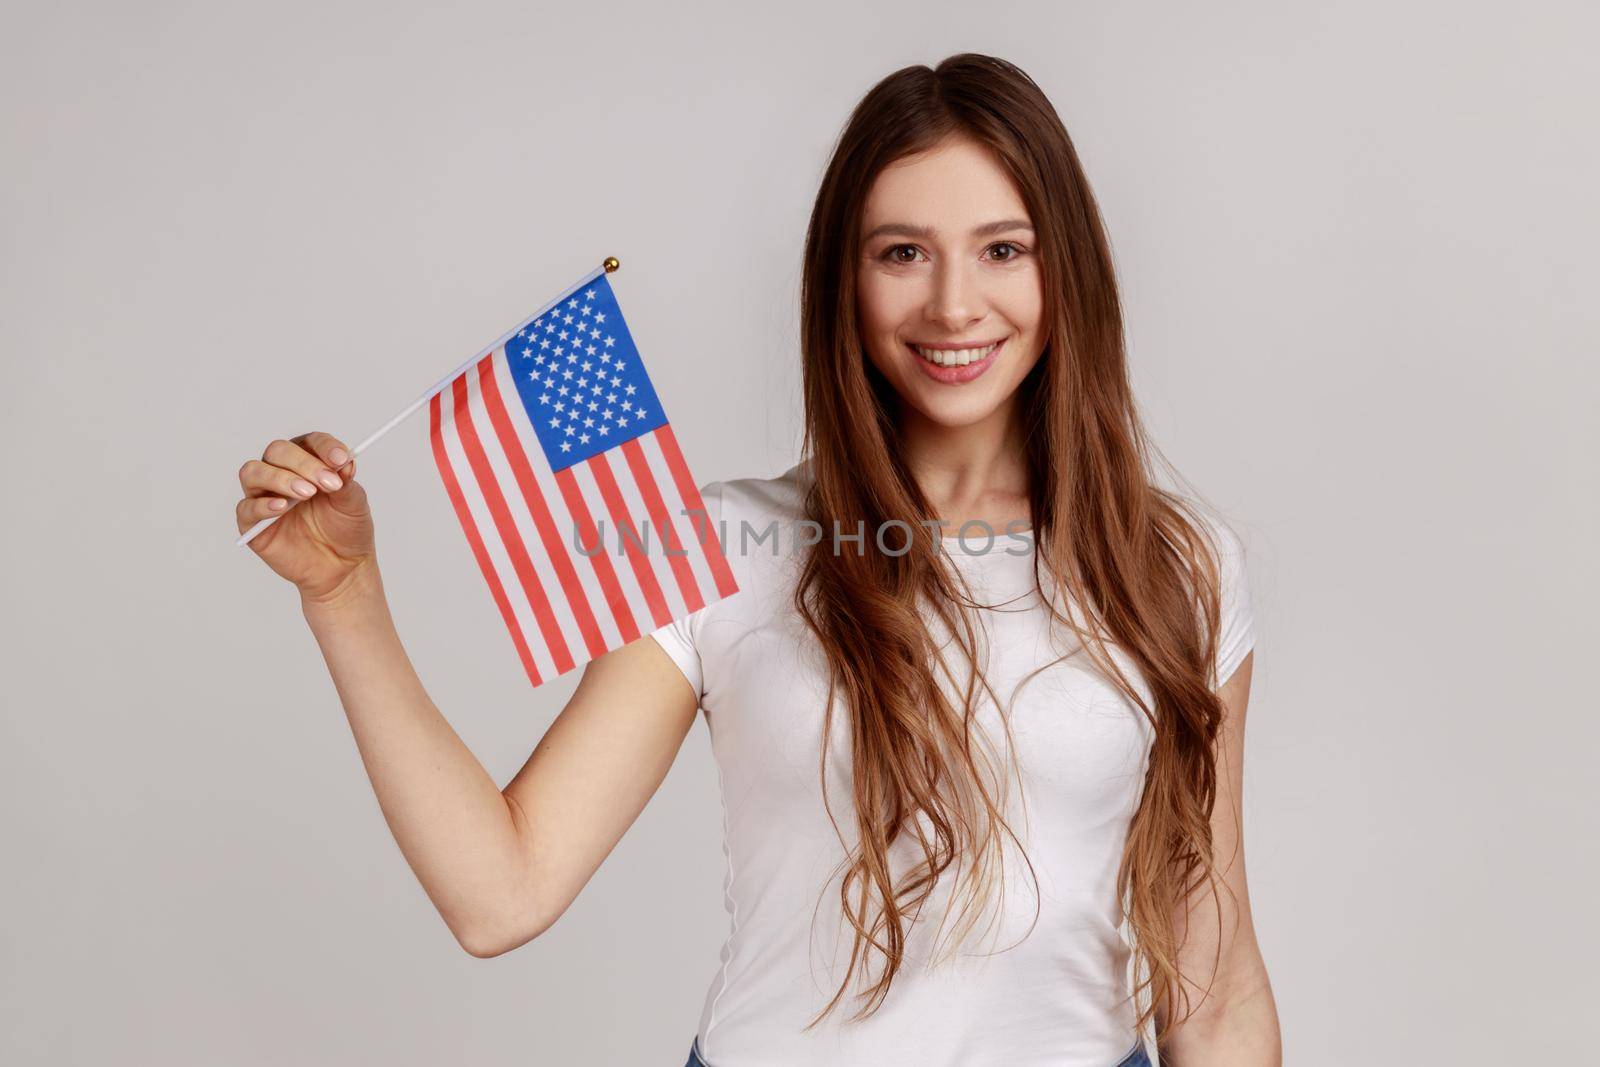 Portrait of smiling young adult woman holding USA national flag, celebrating national Independence Day - 4th july, wearing white T-shirt. Indoor studio shot isolated on gray background.